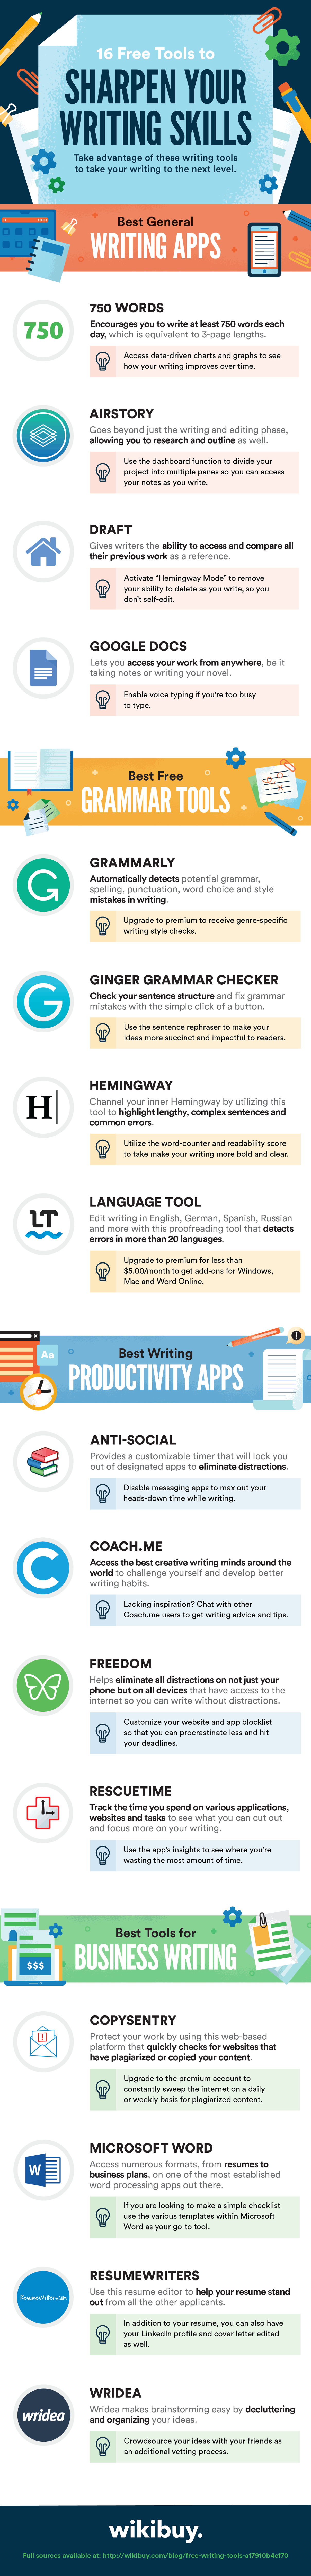 16 free tools to sharpen your writing skills infographic